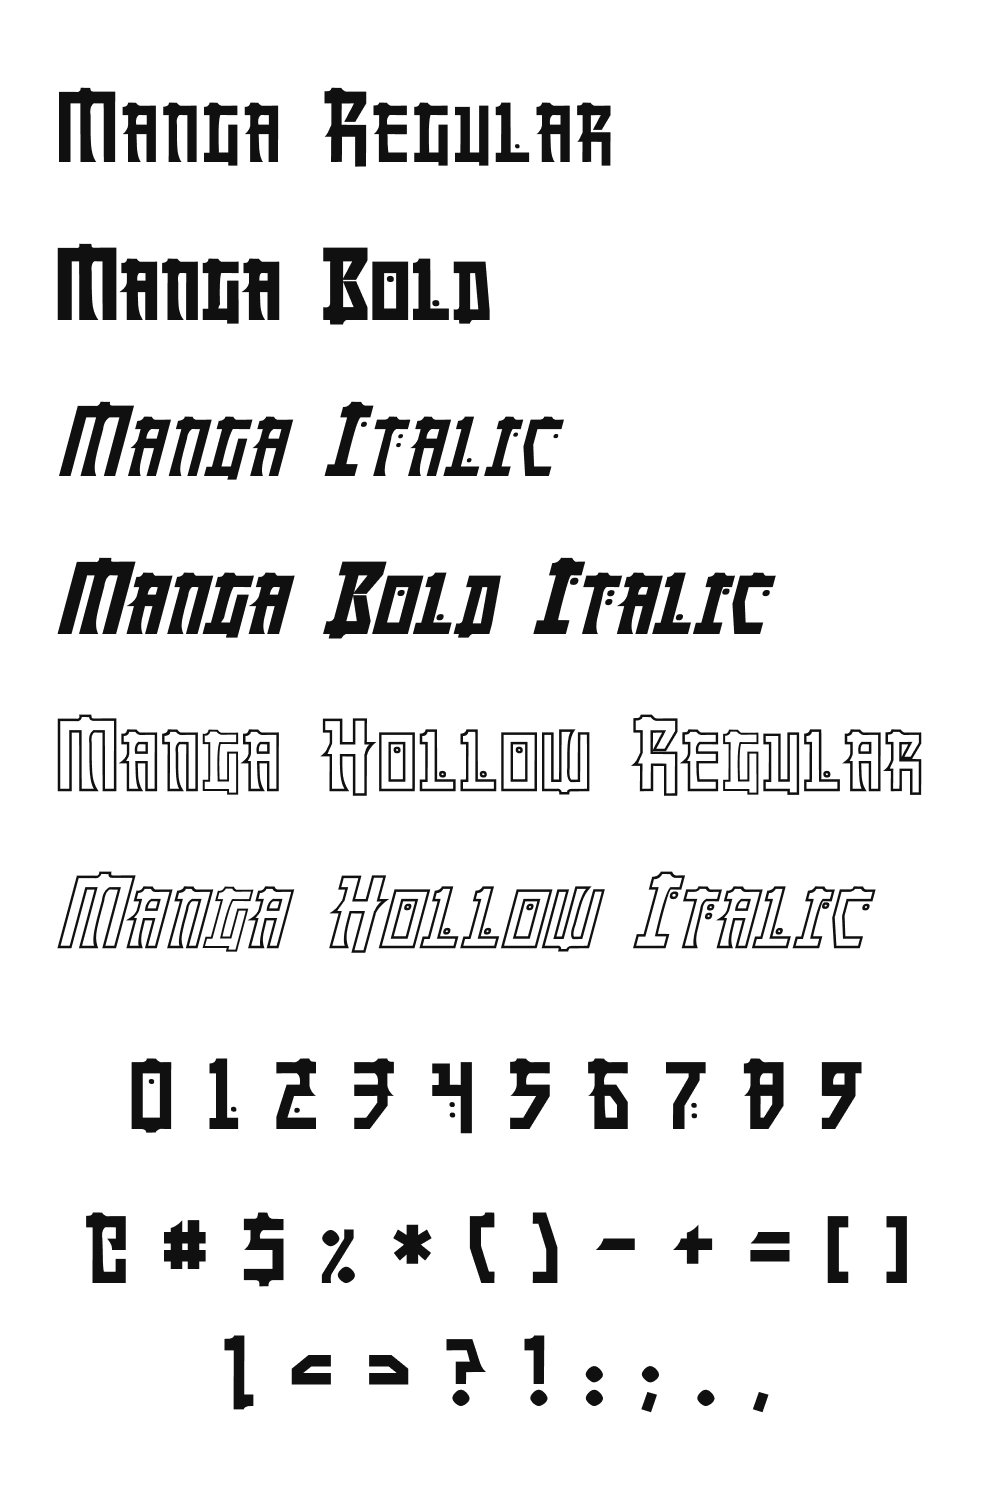 Different style of manga font.